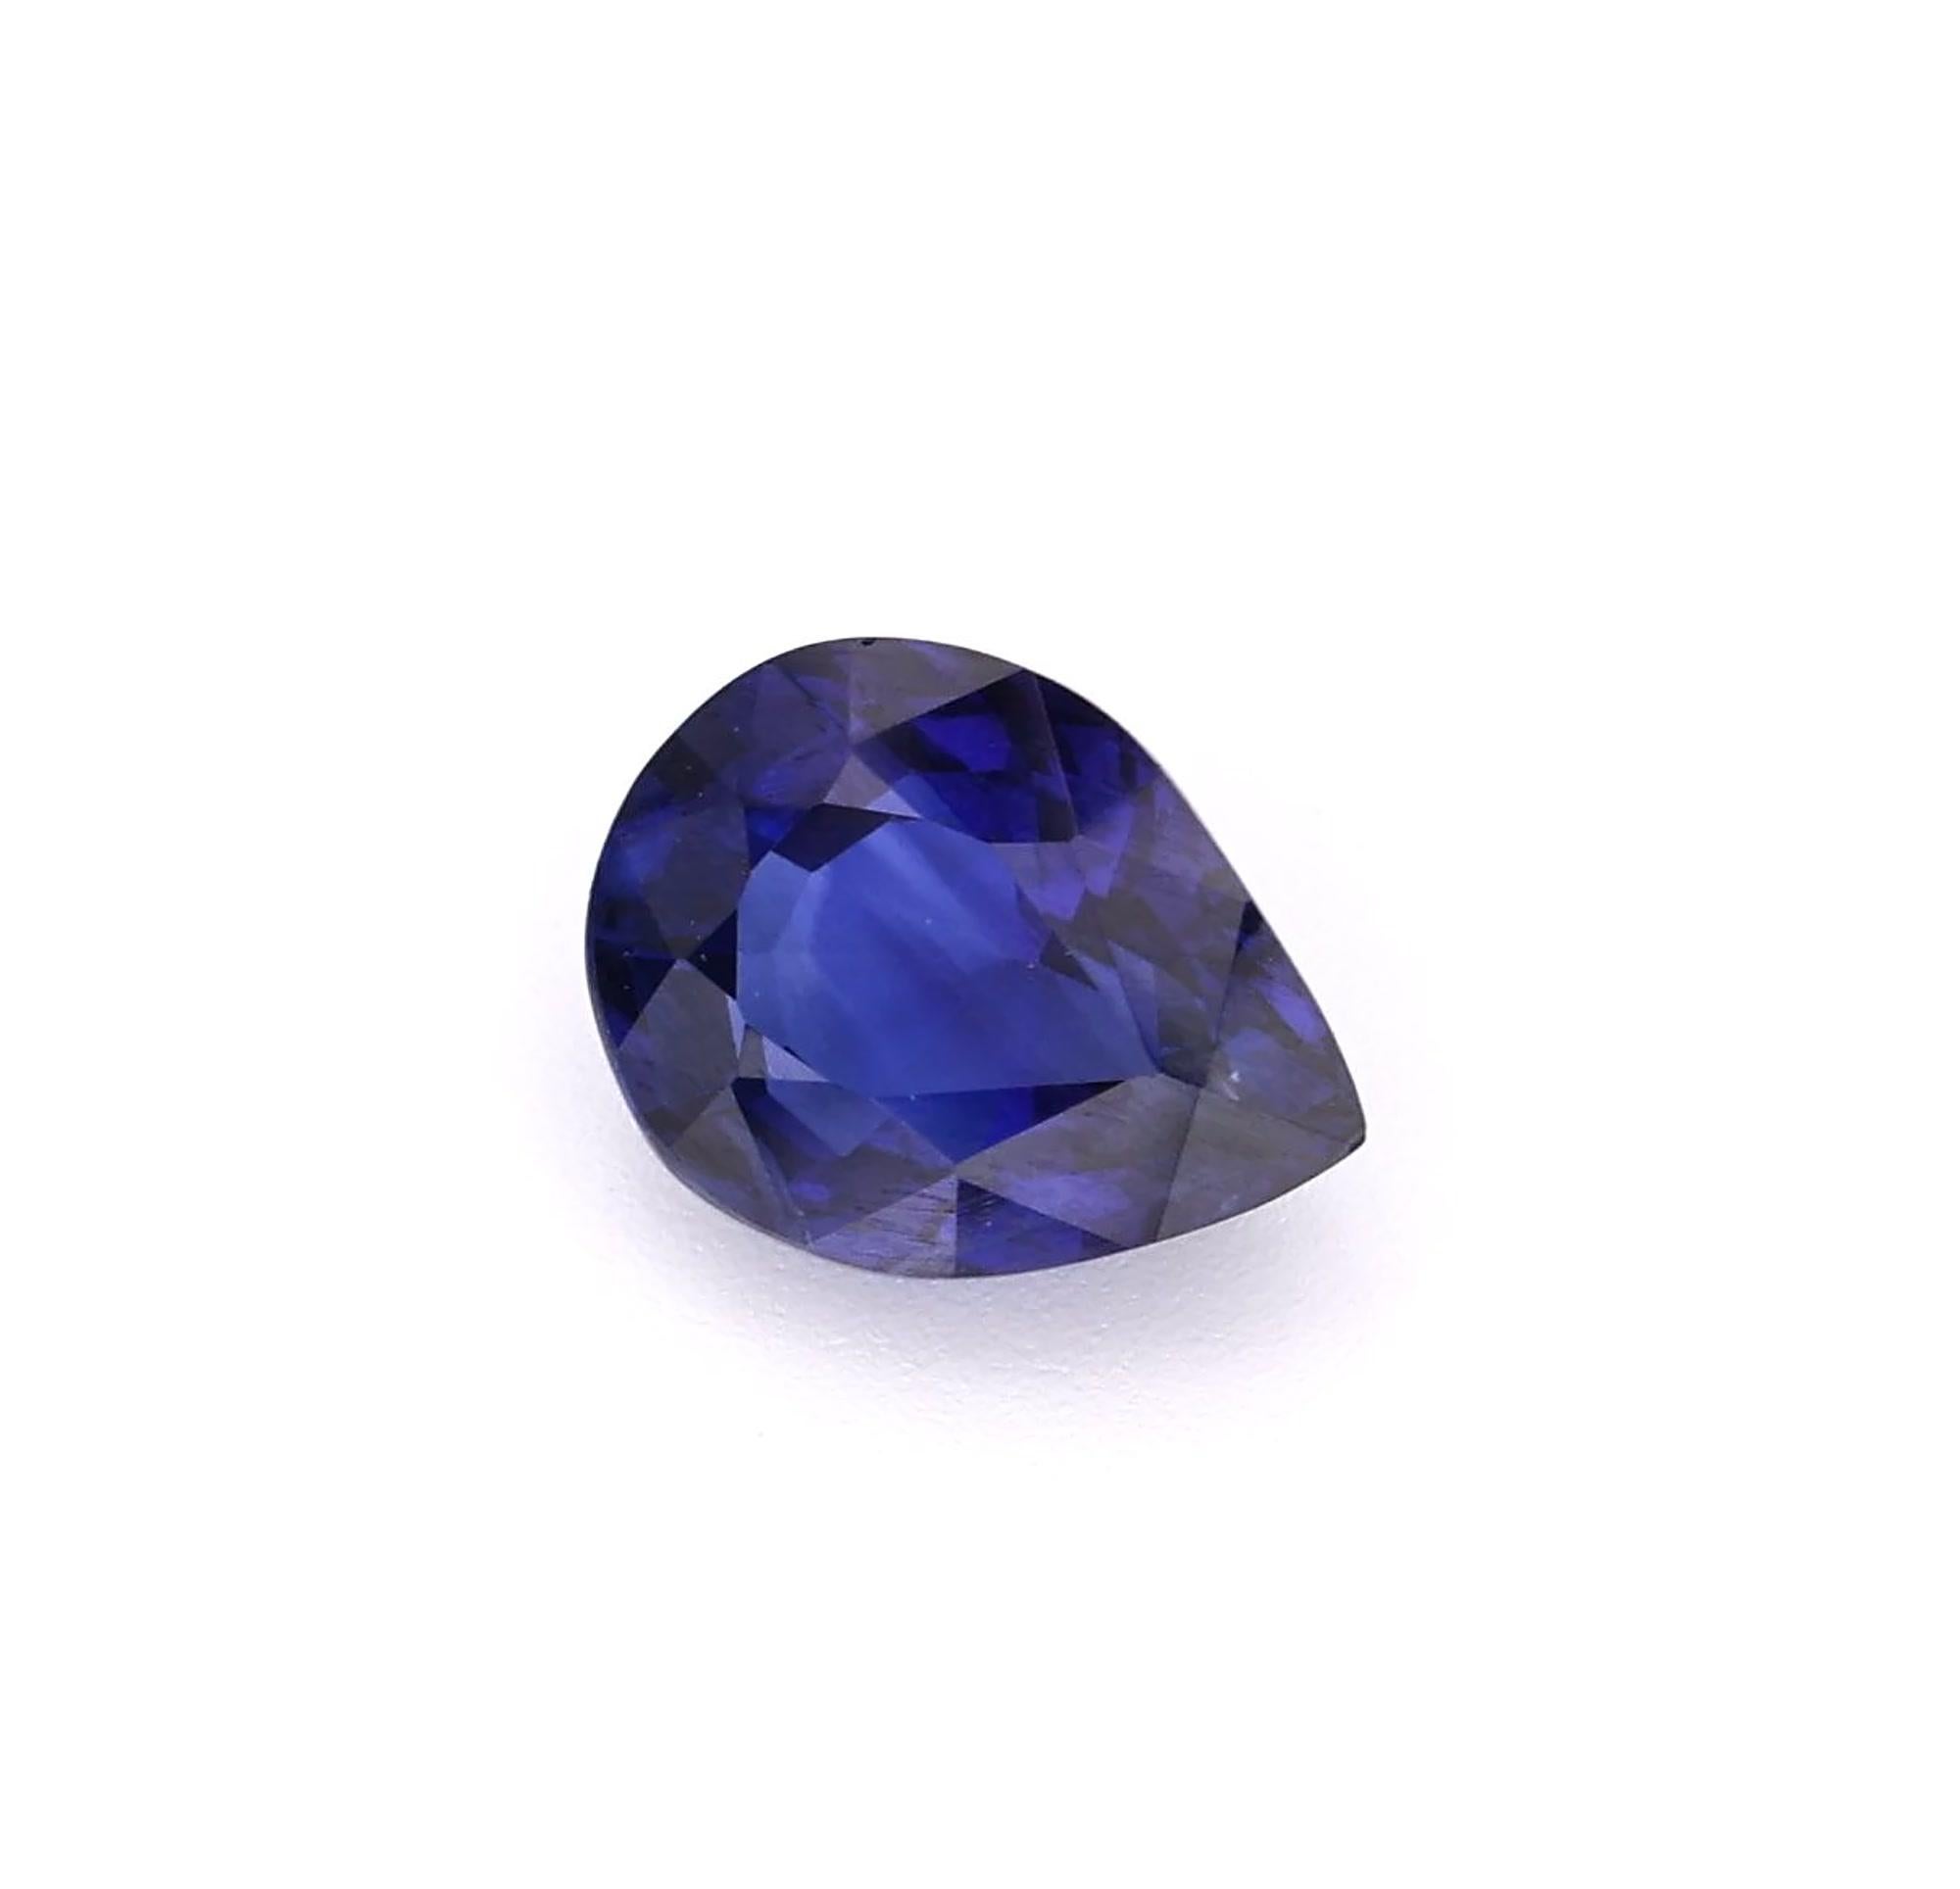 Natural Blue Sapphire Royal Blue color Pear shape. This exquisite gemstone originates from Ceylon (Sri Lanka), known for producing exceptional quality stones. With its internally flawless clarity.

• Variety: Blue Sapphire 
• Origin: Sri Lanka